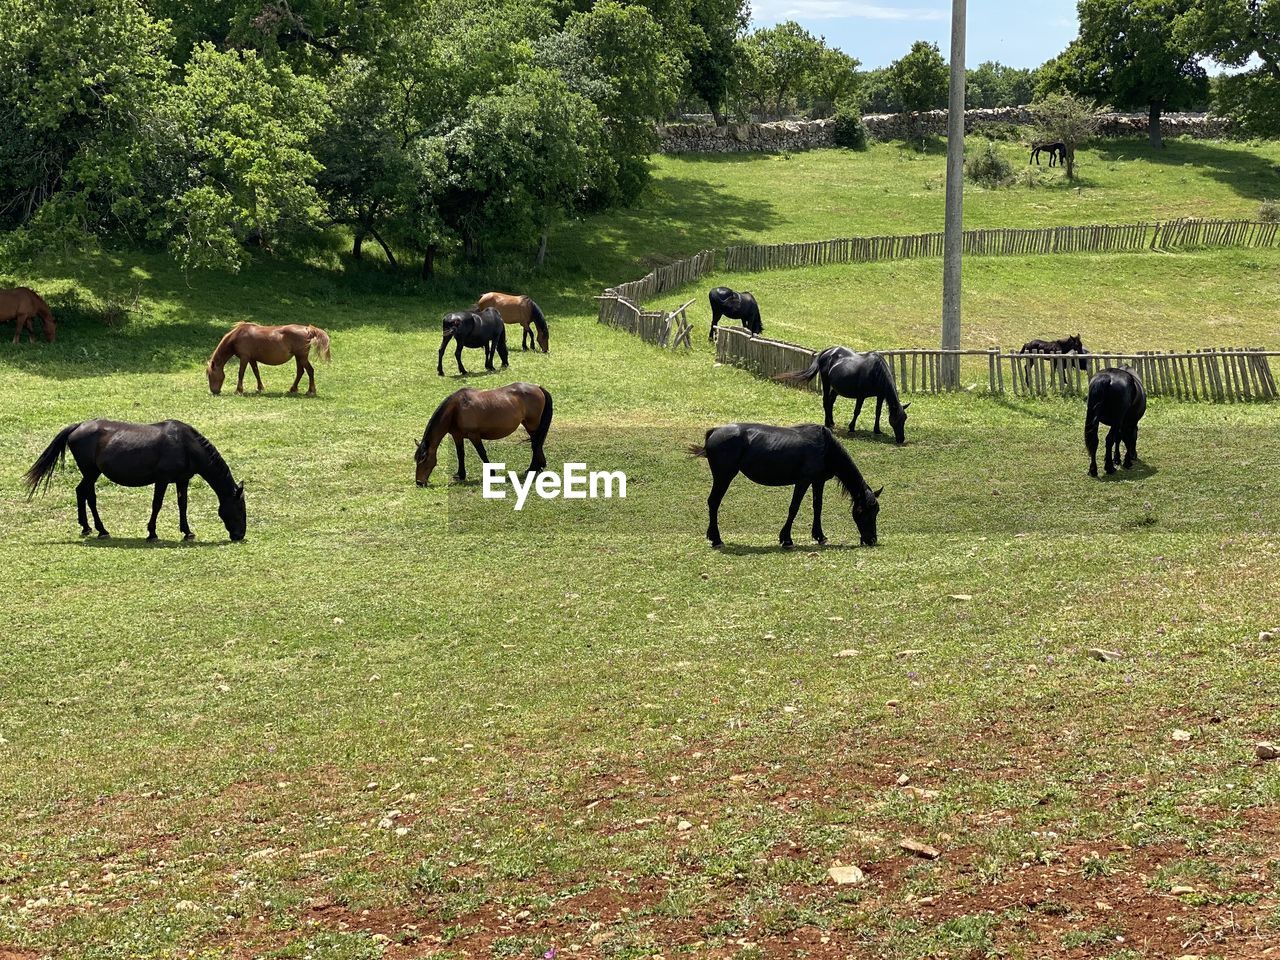 VIEW OF ANIMALS ON FIELD